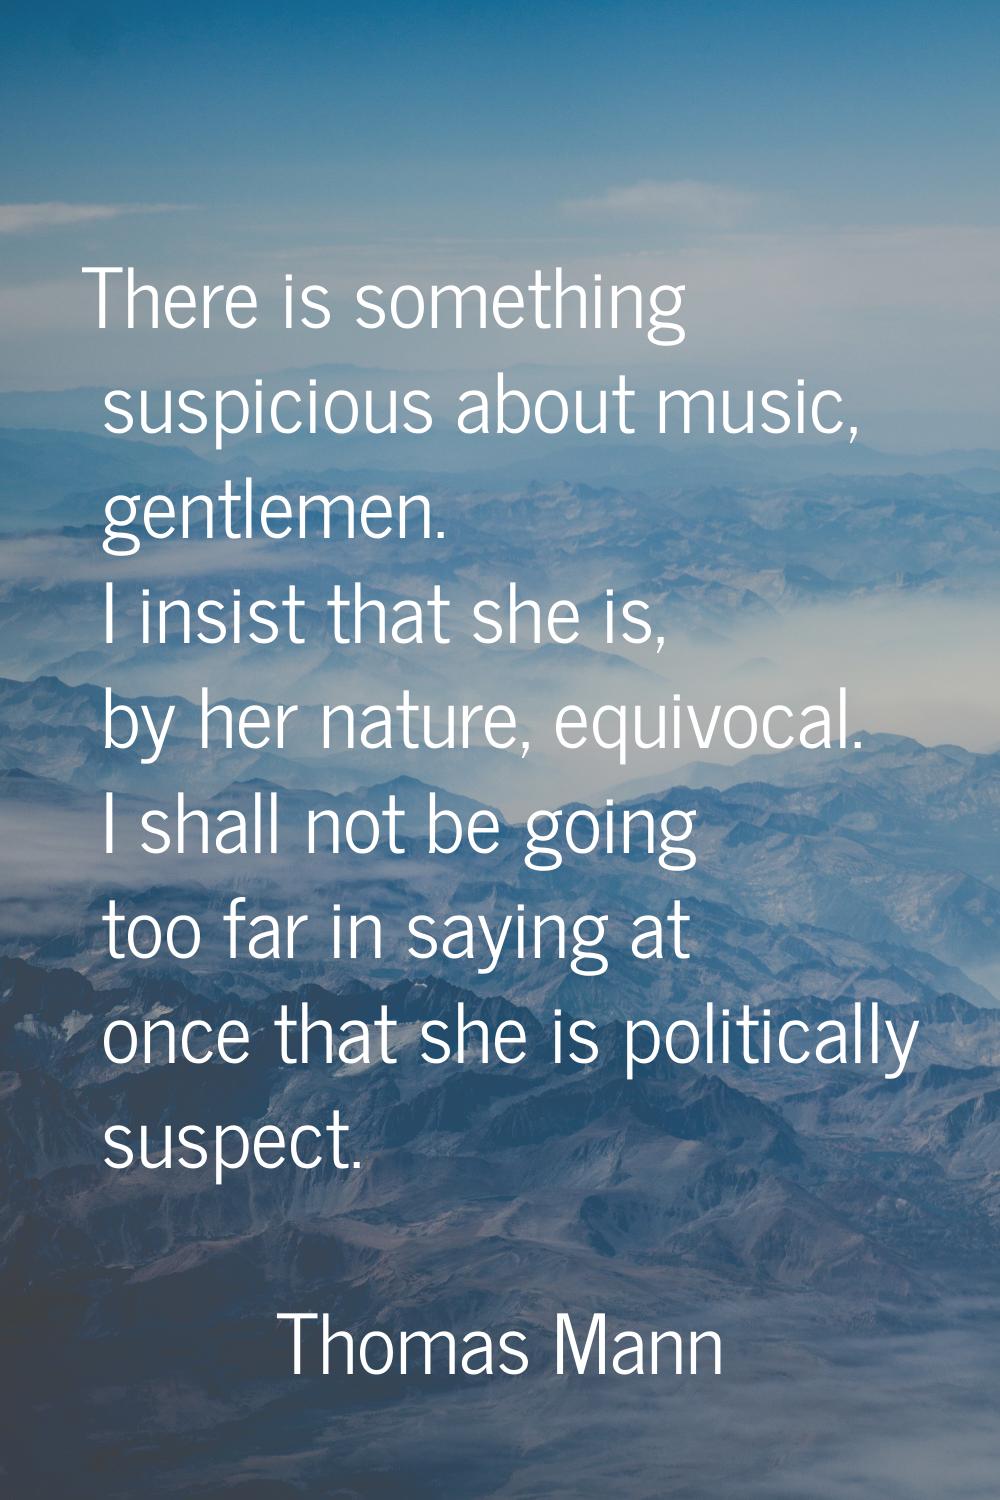 There is something suspicious about music, gentlemen. I insist that she is, by her nature, equivoca